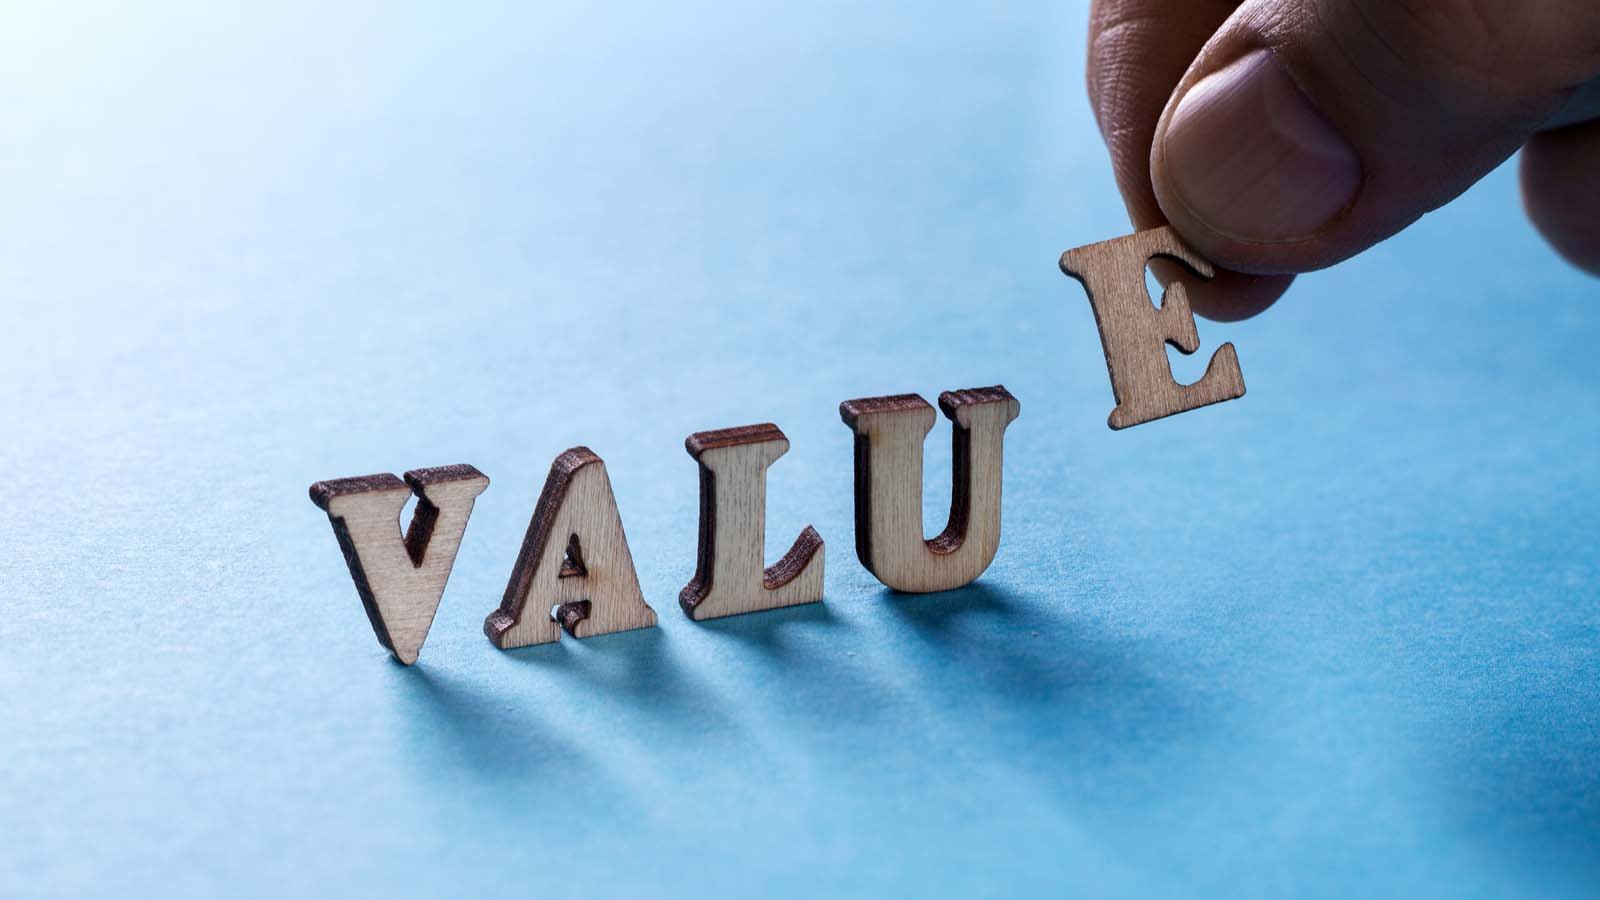 Wooden letters spell out "VALUE."